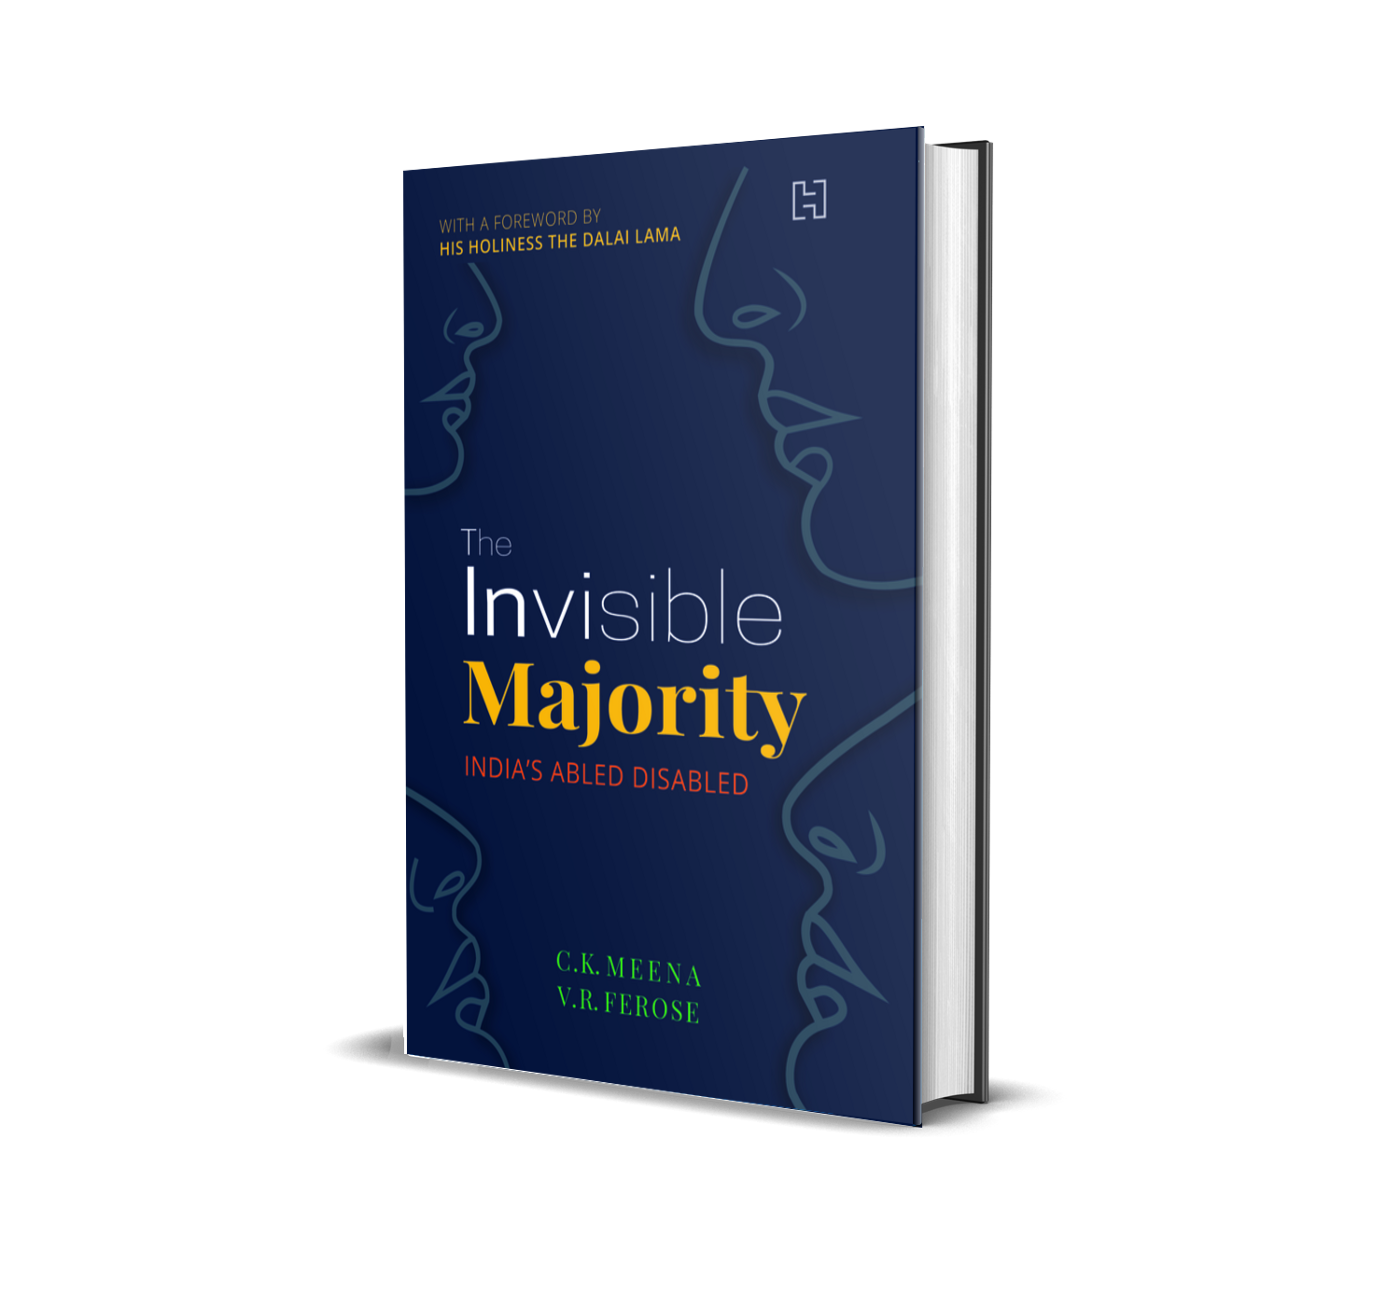 Why I wrote “The Invisible Majority”